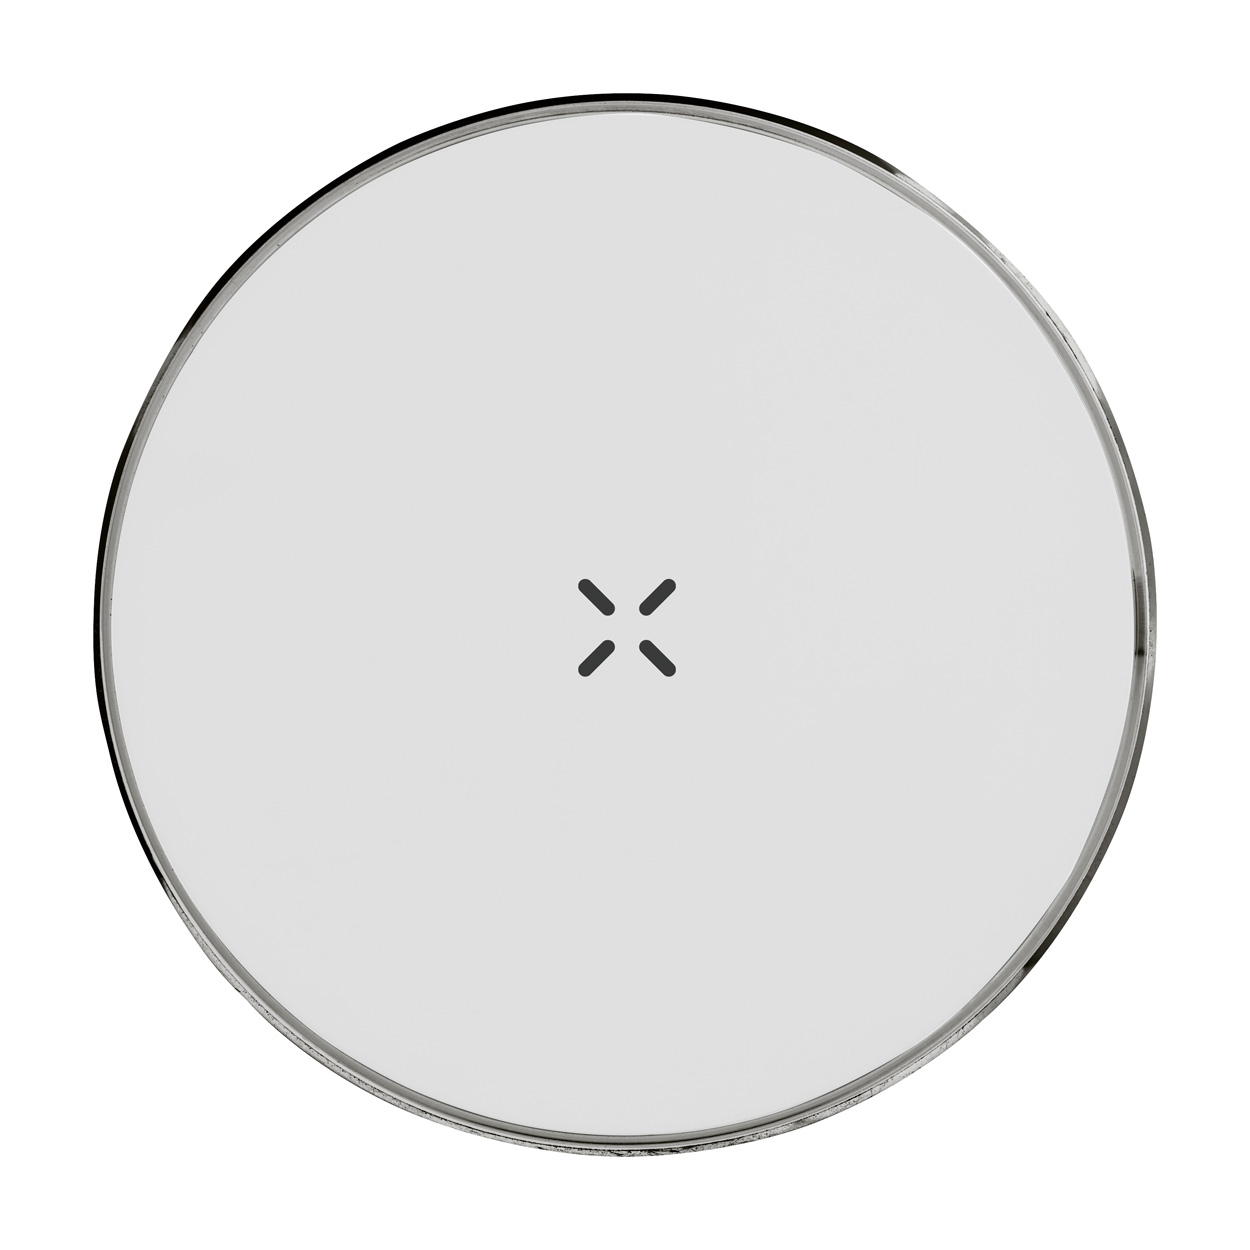 Golop wireless charger - white